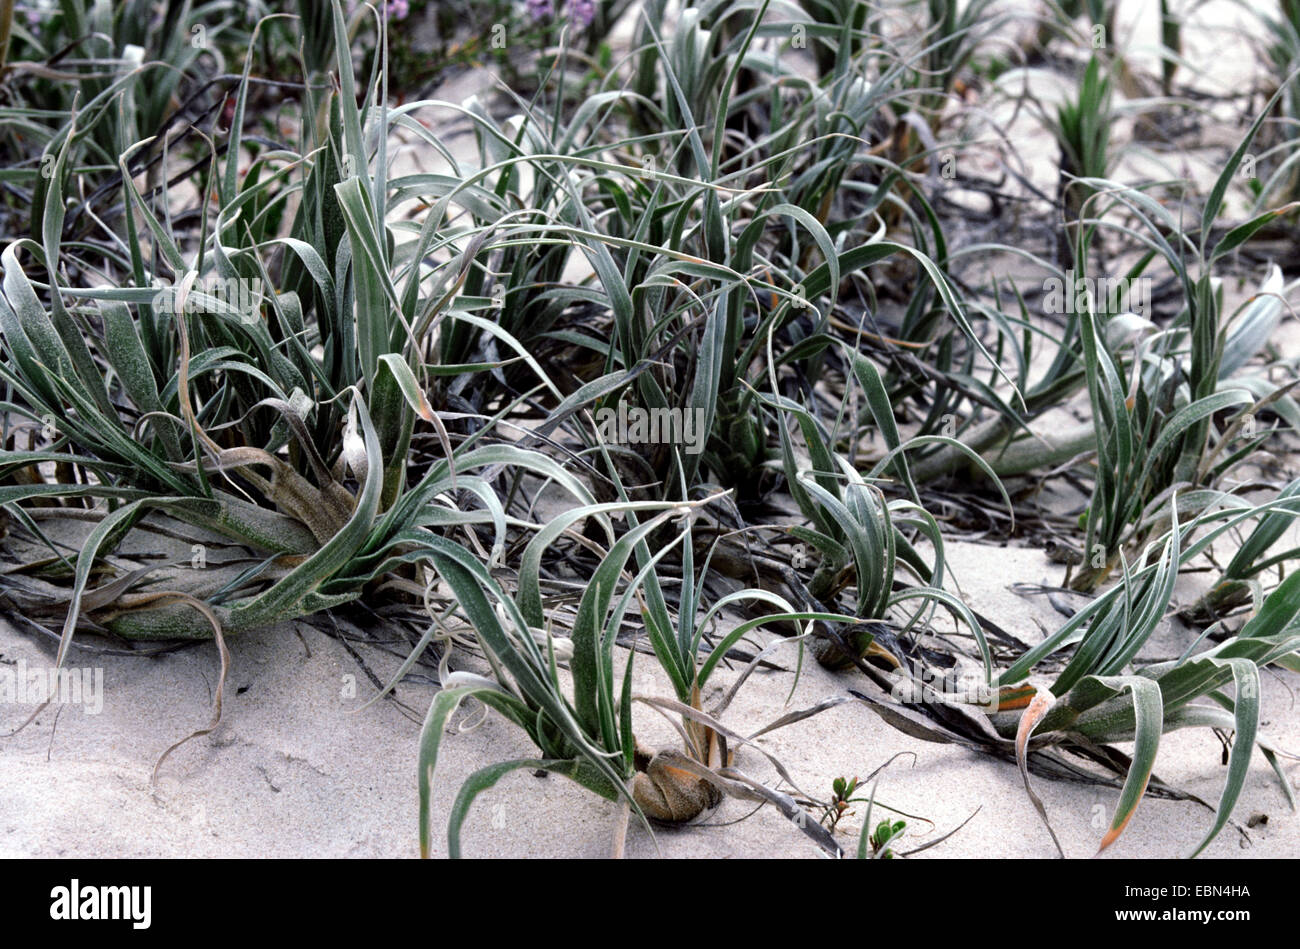 Spinifex (Spinifex hirsutus), plants at the beach Stock Photo